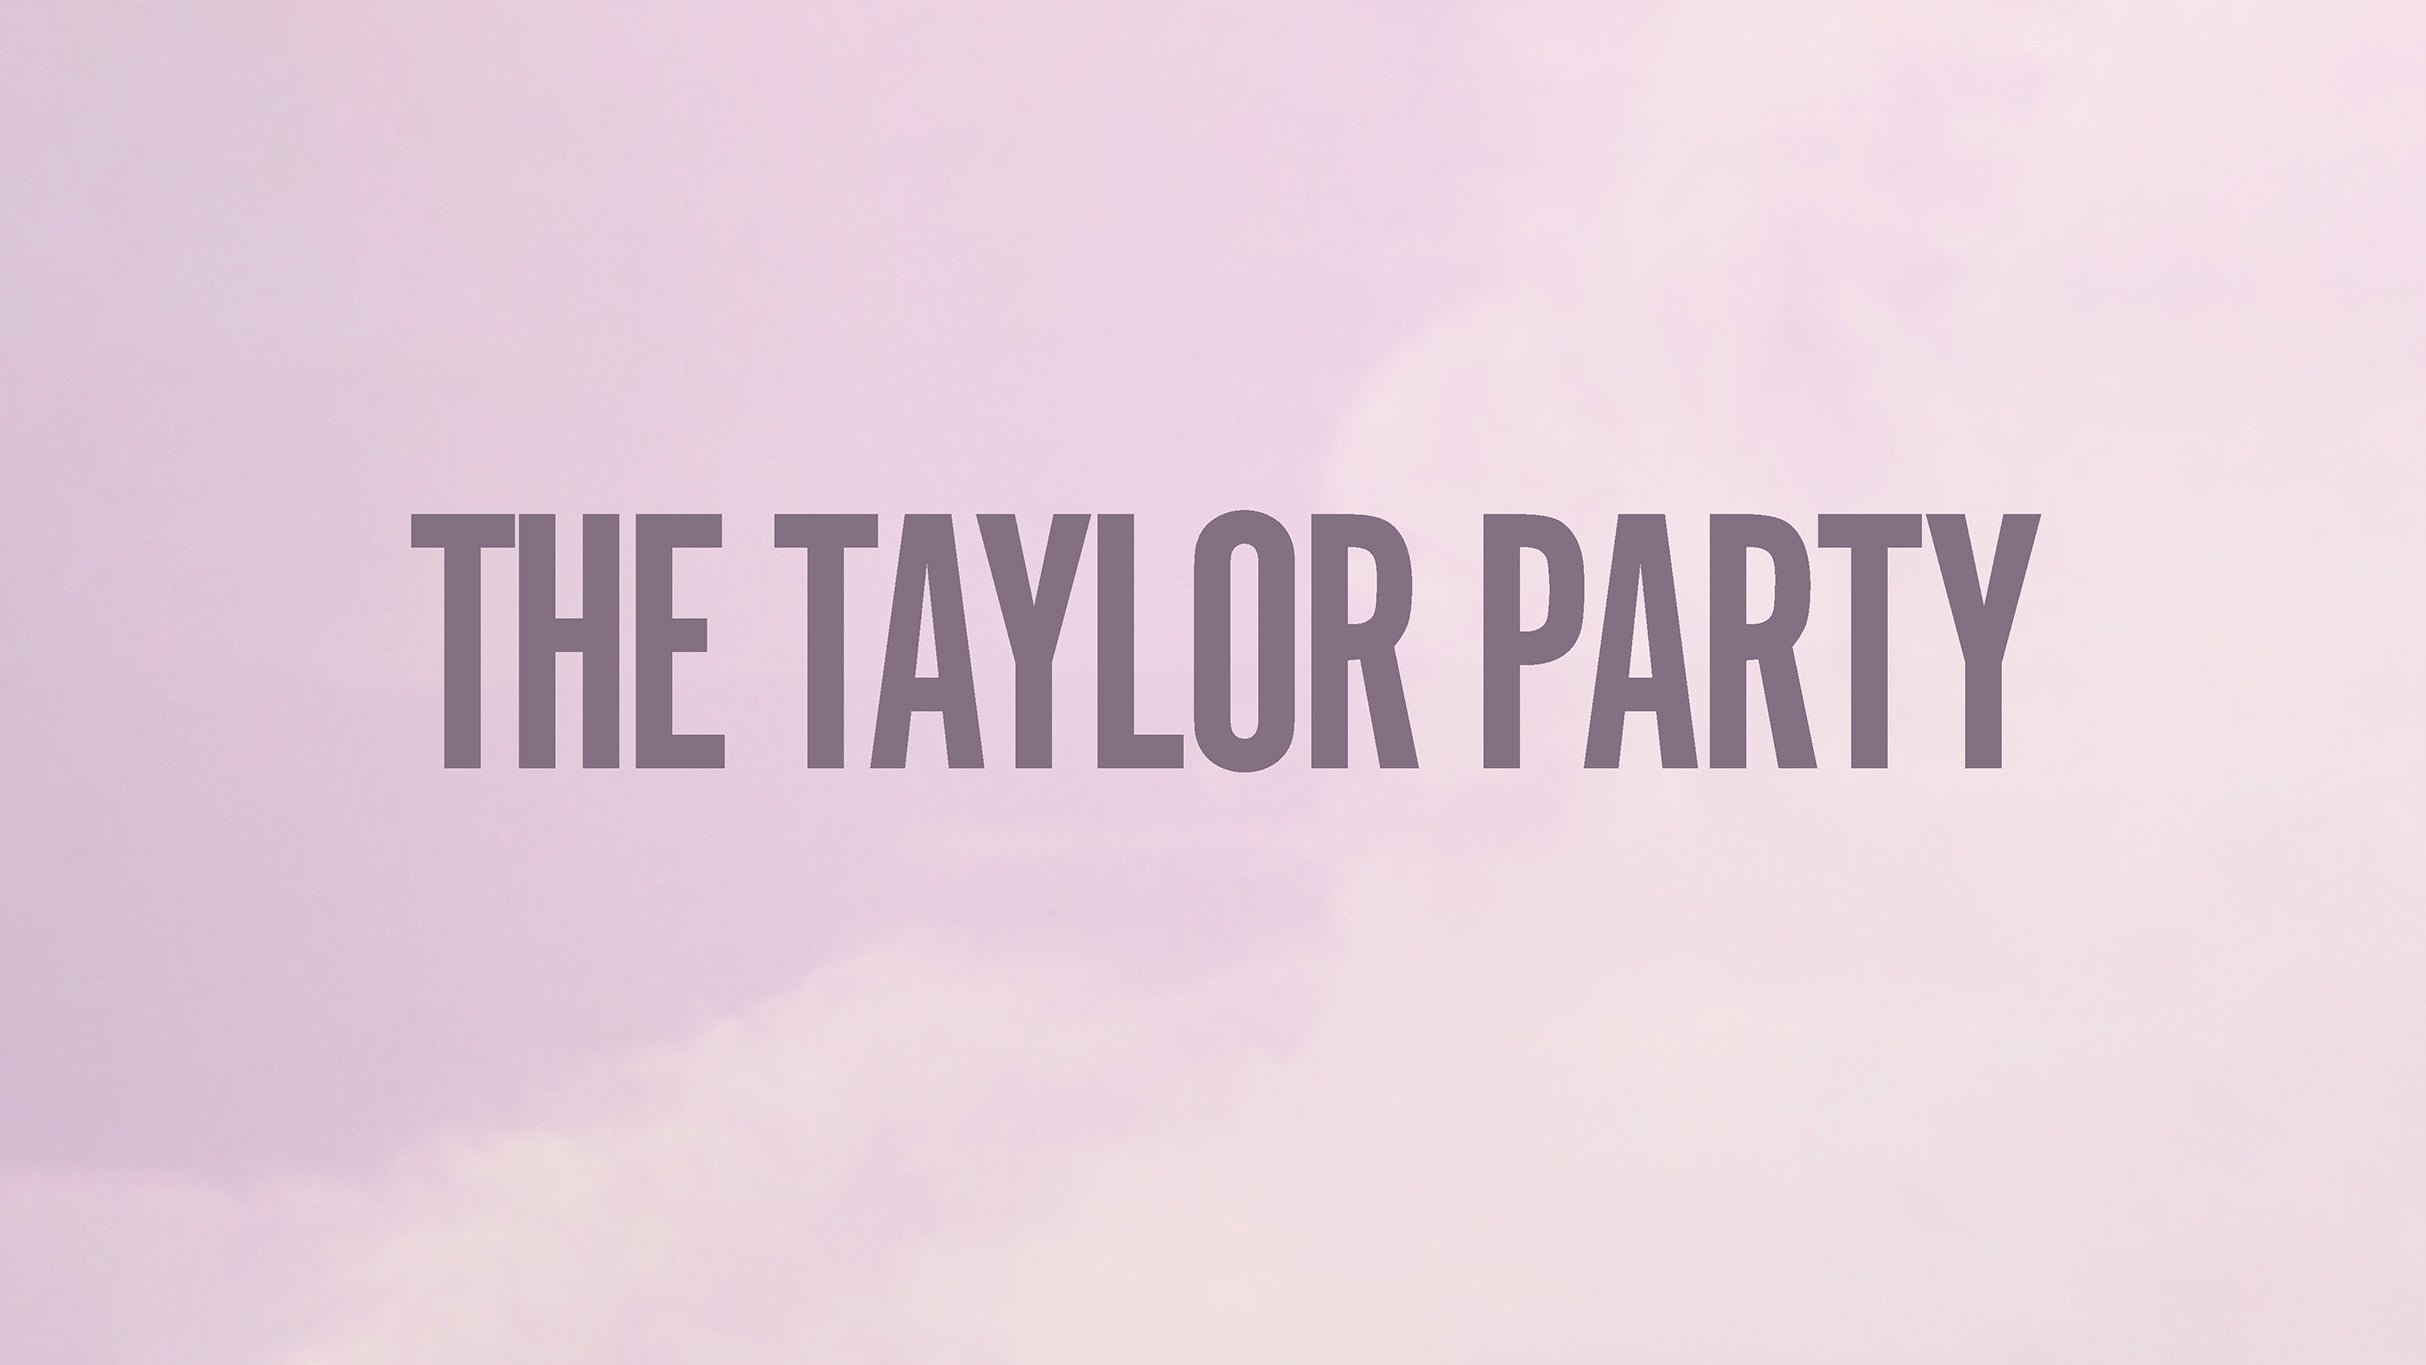 presale password for The Taylor Party: Taylor Night face value tickets in Los Angeles